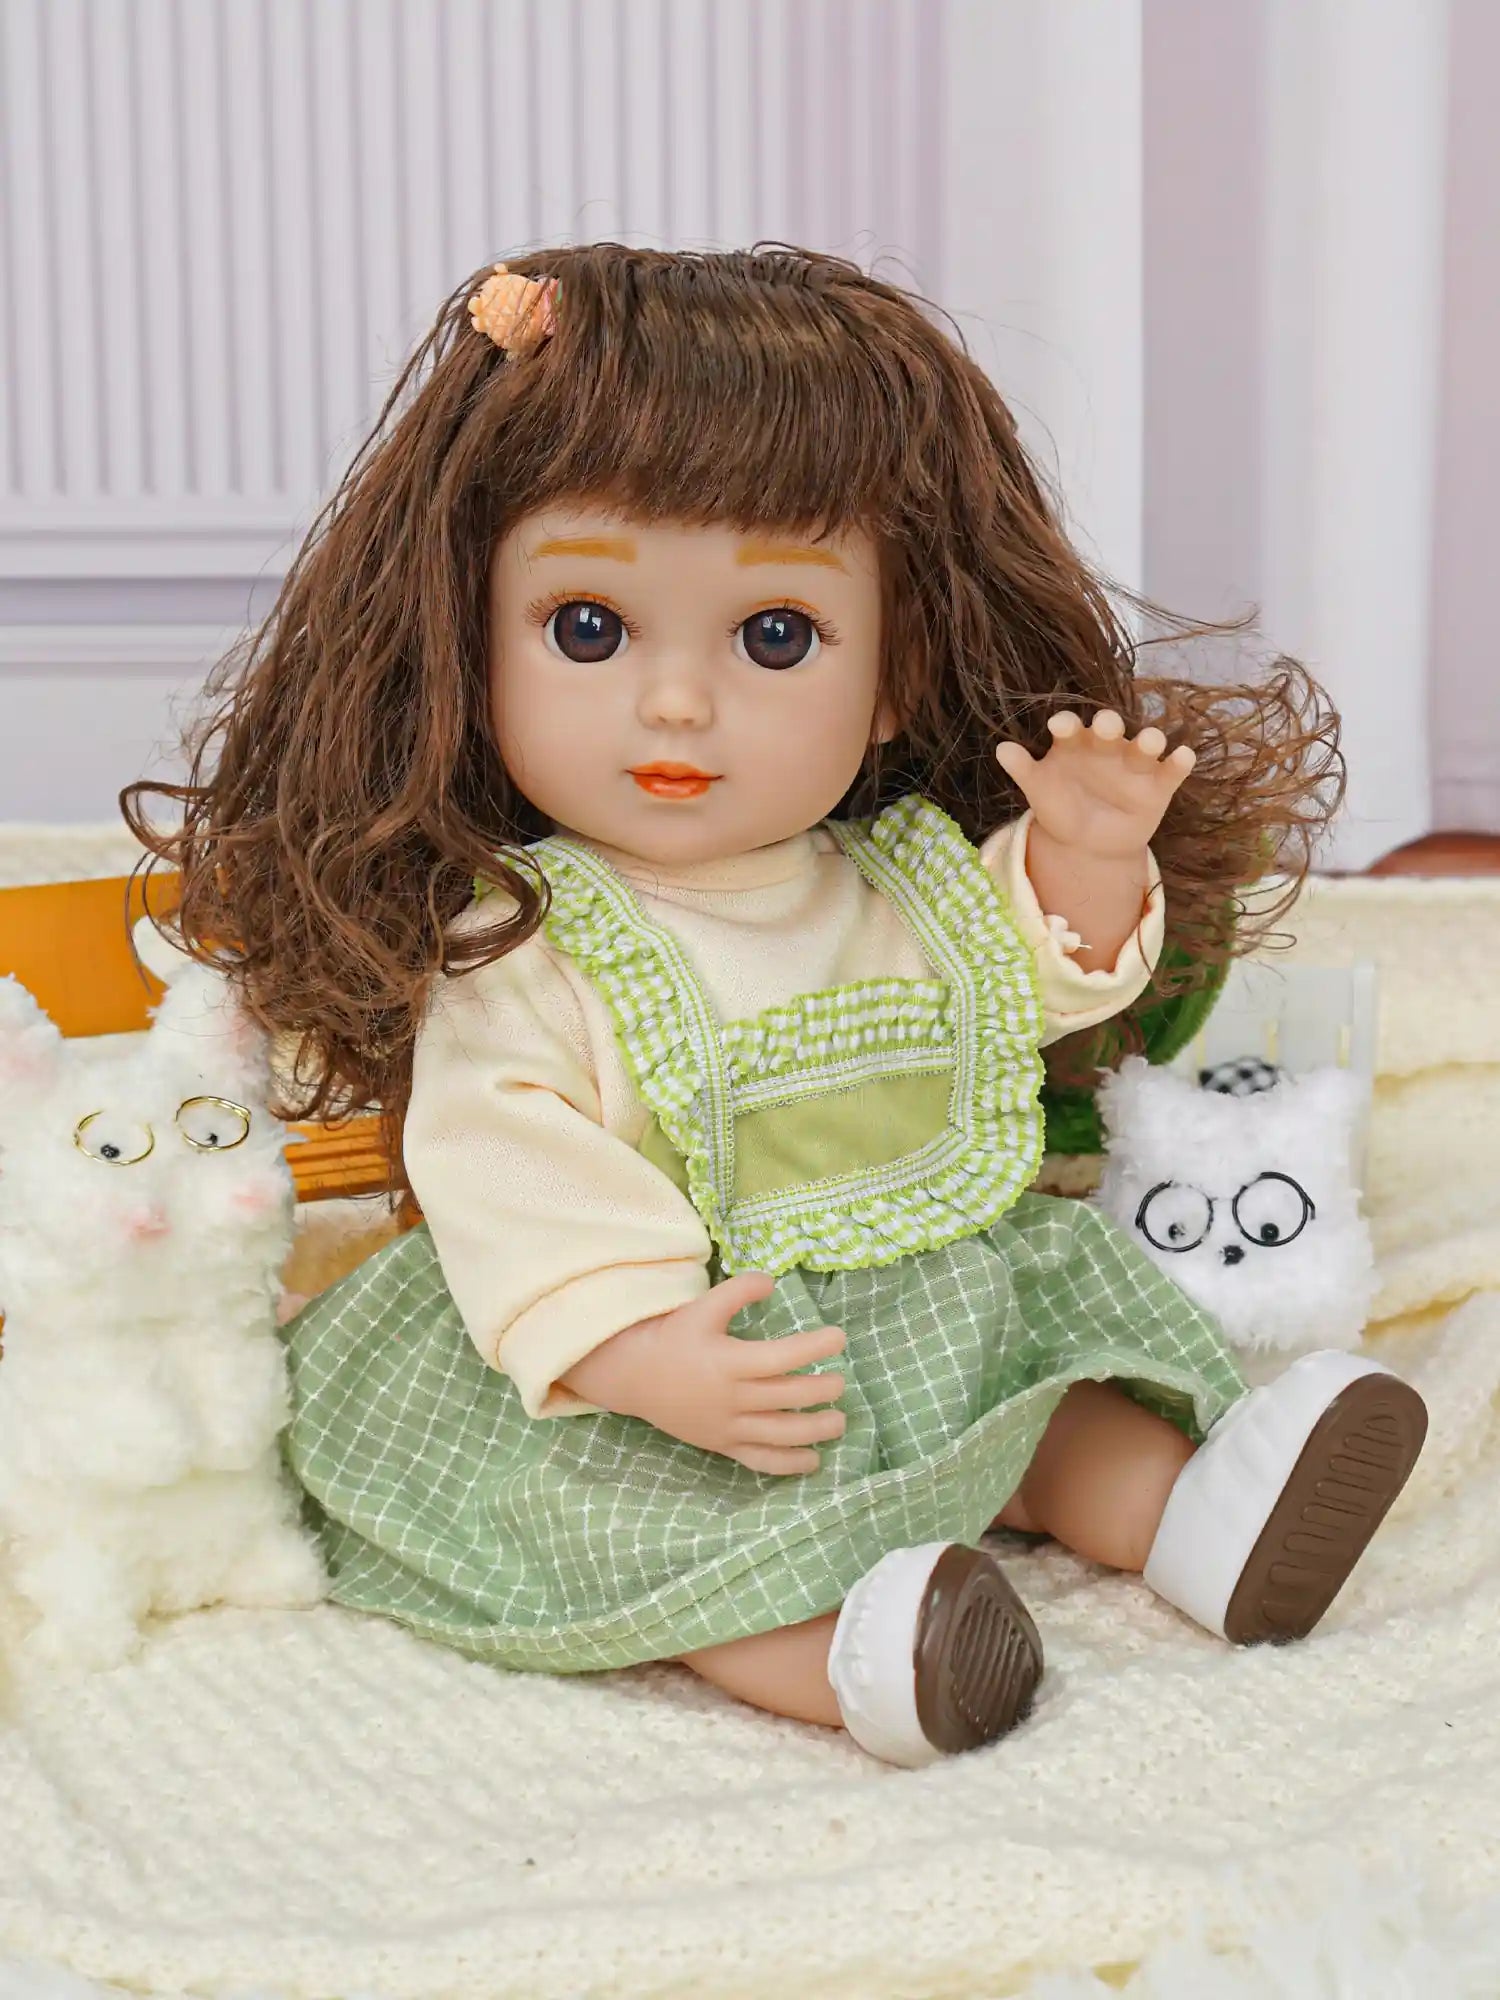 Playful doll with hair clip in green and yellow clothes, with plush dogs wearing glasses.